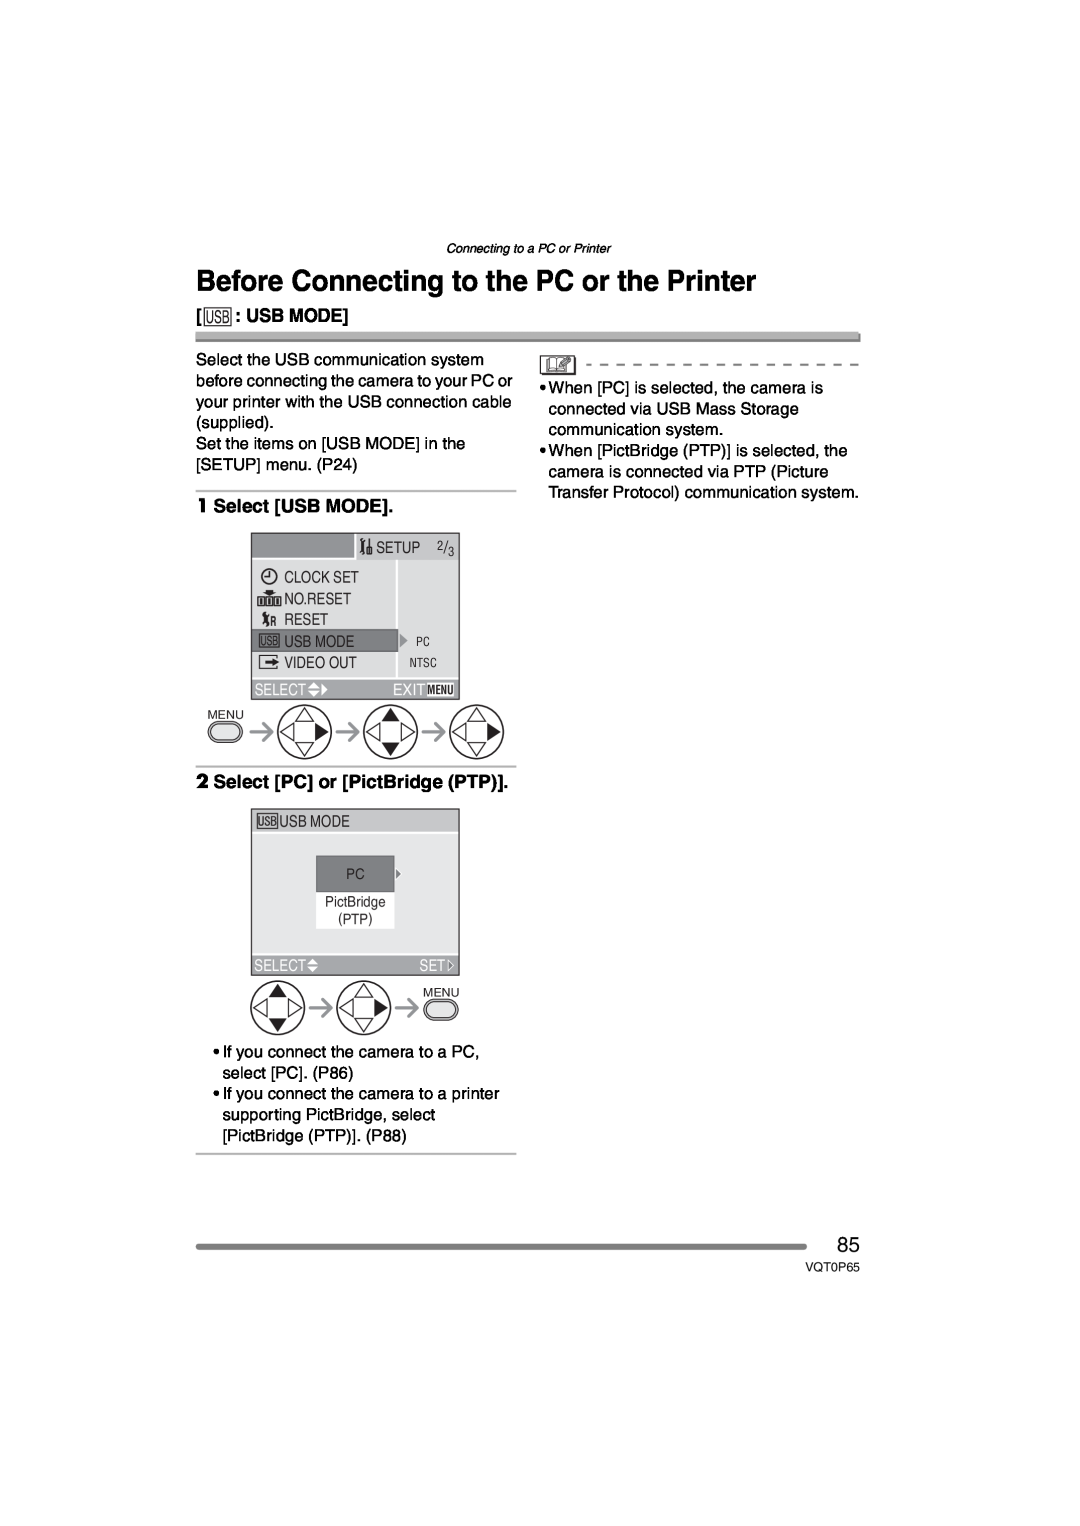 Panasonic DMC-LZ1PP Before Connecting to the PC or the Printer, Usb Mode, Select USB MODE, Select PC or PictBridge PTP 